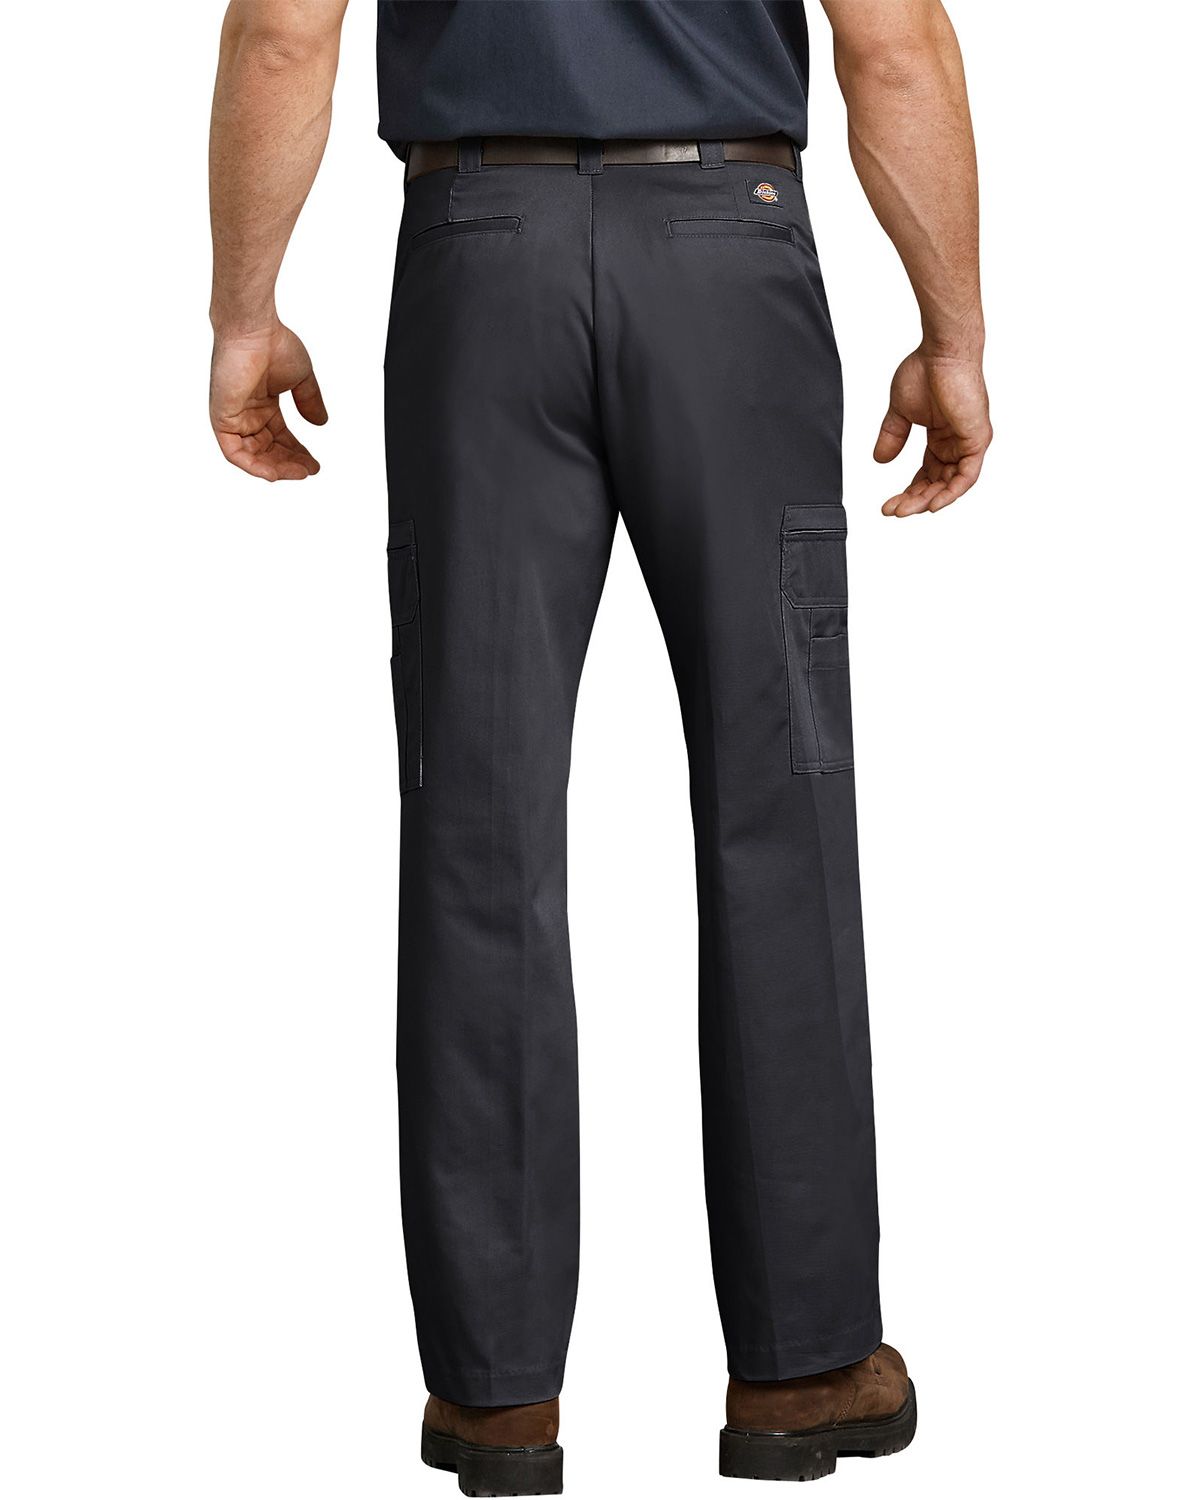 Size Chart for Dickies LP337 Industrial Cotton Cargo Pant